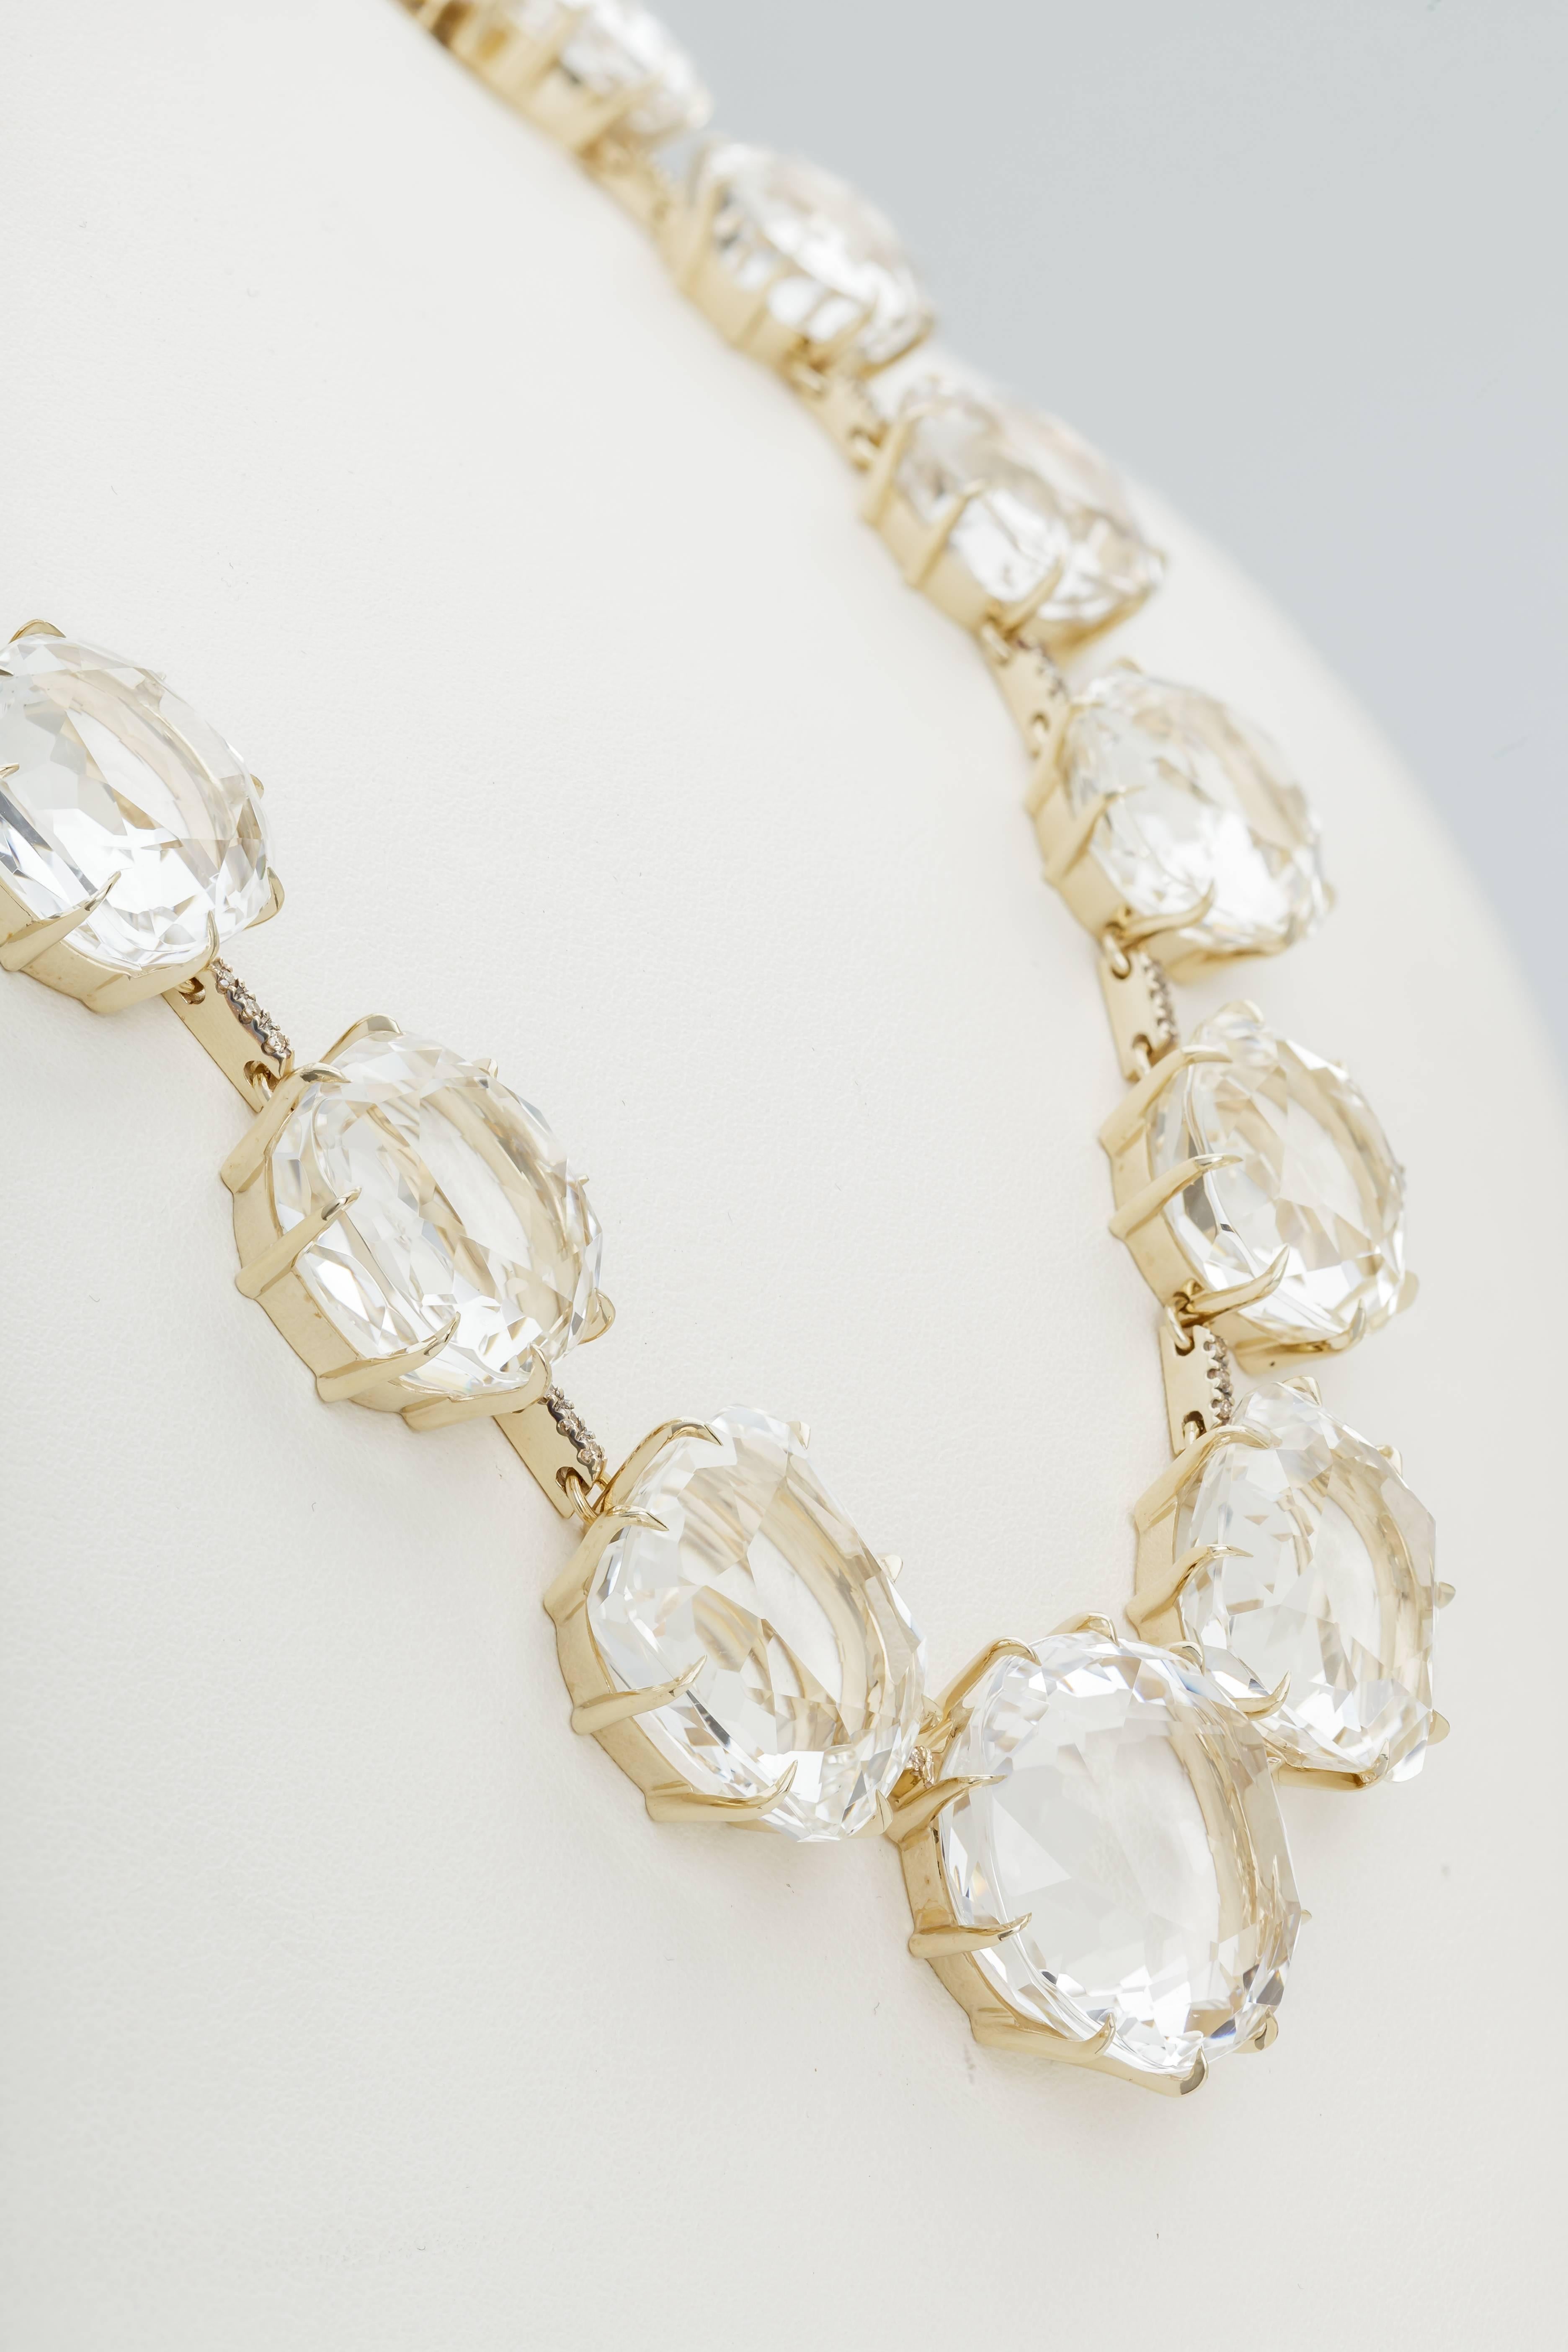 This new H. Stern Moonlight necklace features luminous colorless quartz set in 18k noble gold.  Noble gold, H. Stern's exclusive gold alloy, is between yellow and white gold.  The total quartz weight is 221.49ct.  There are cognac diamonds set